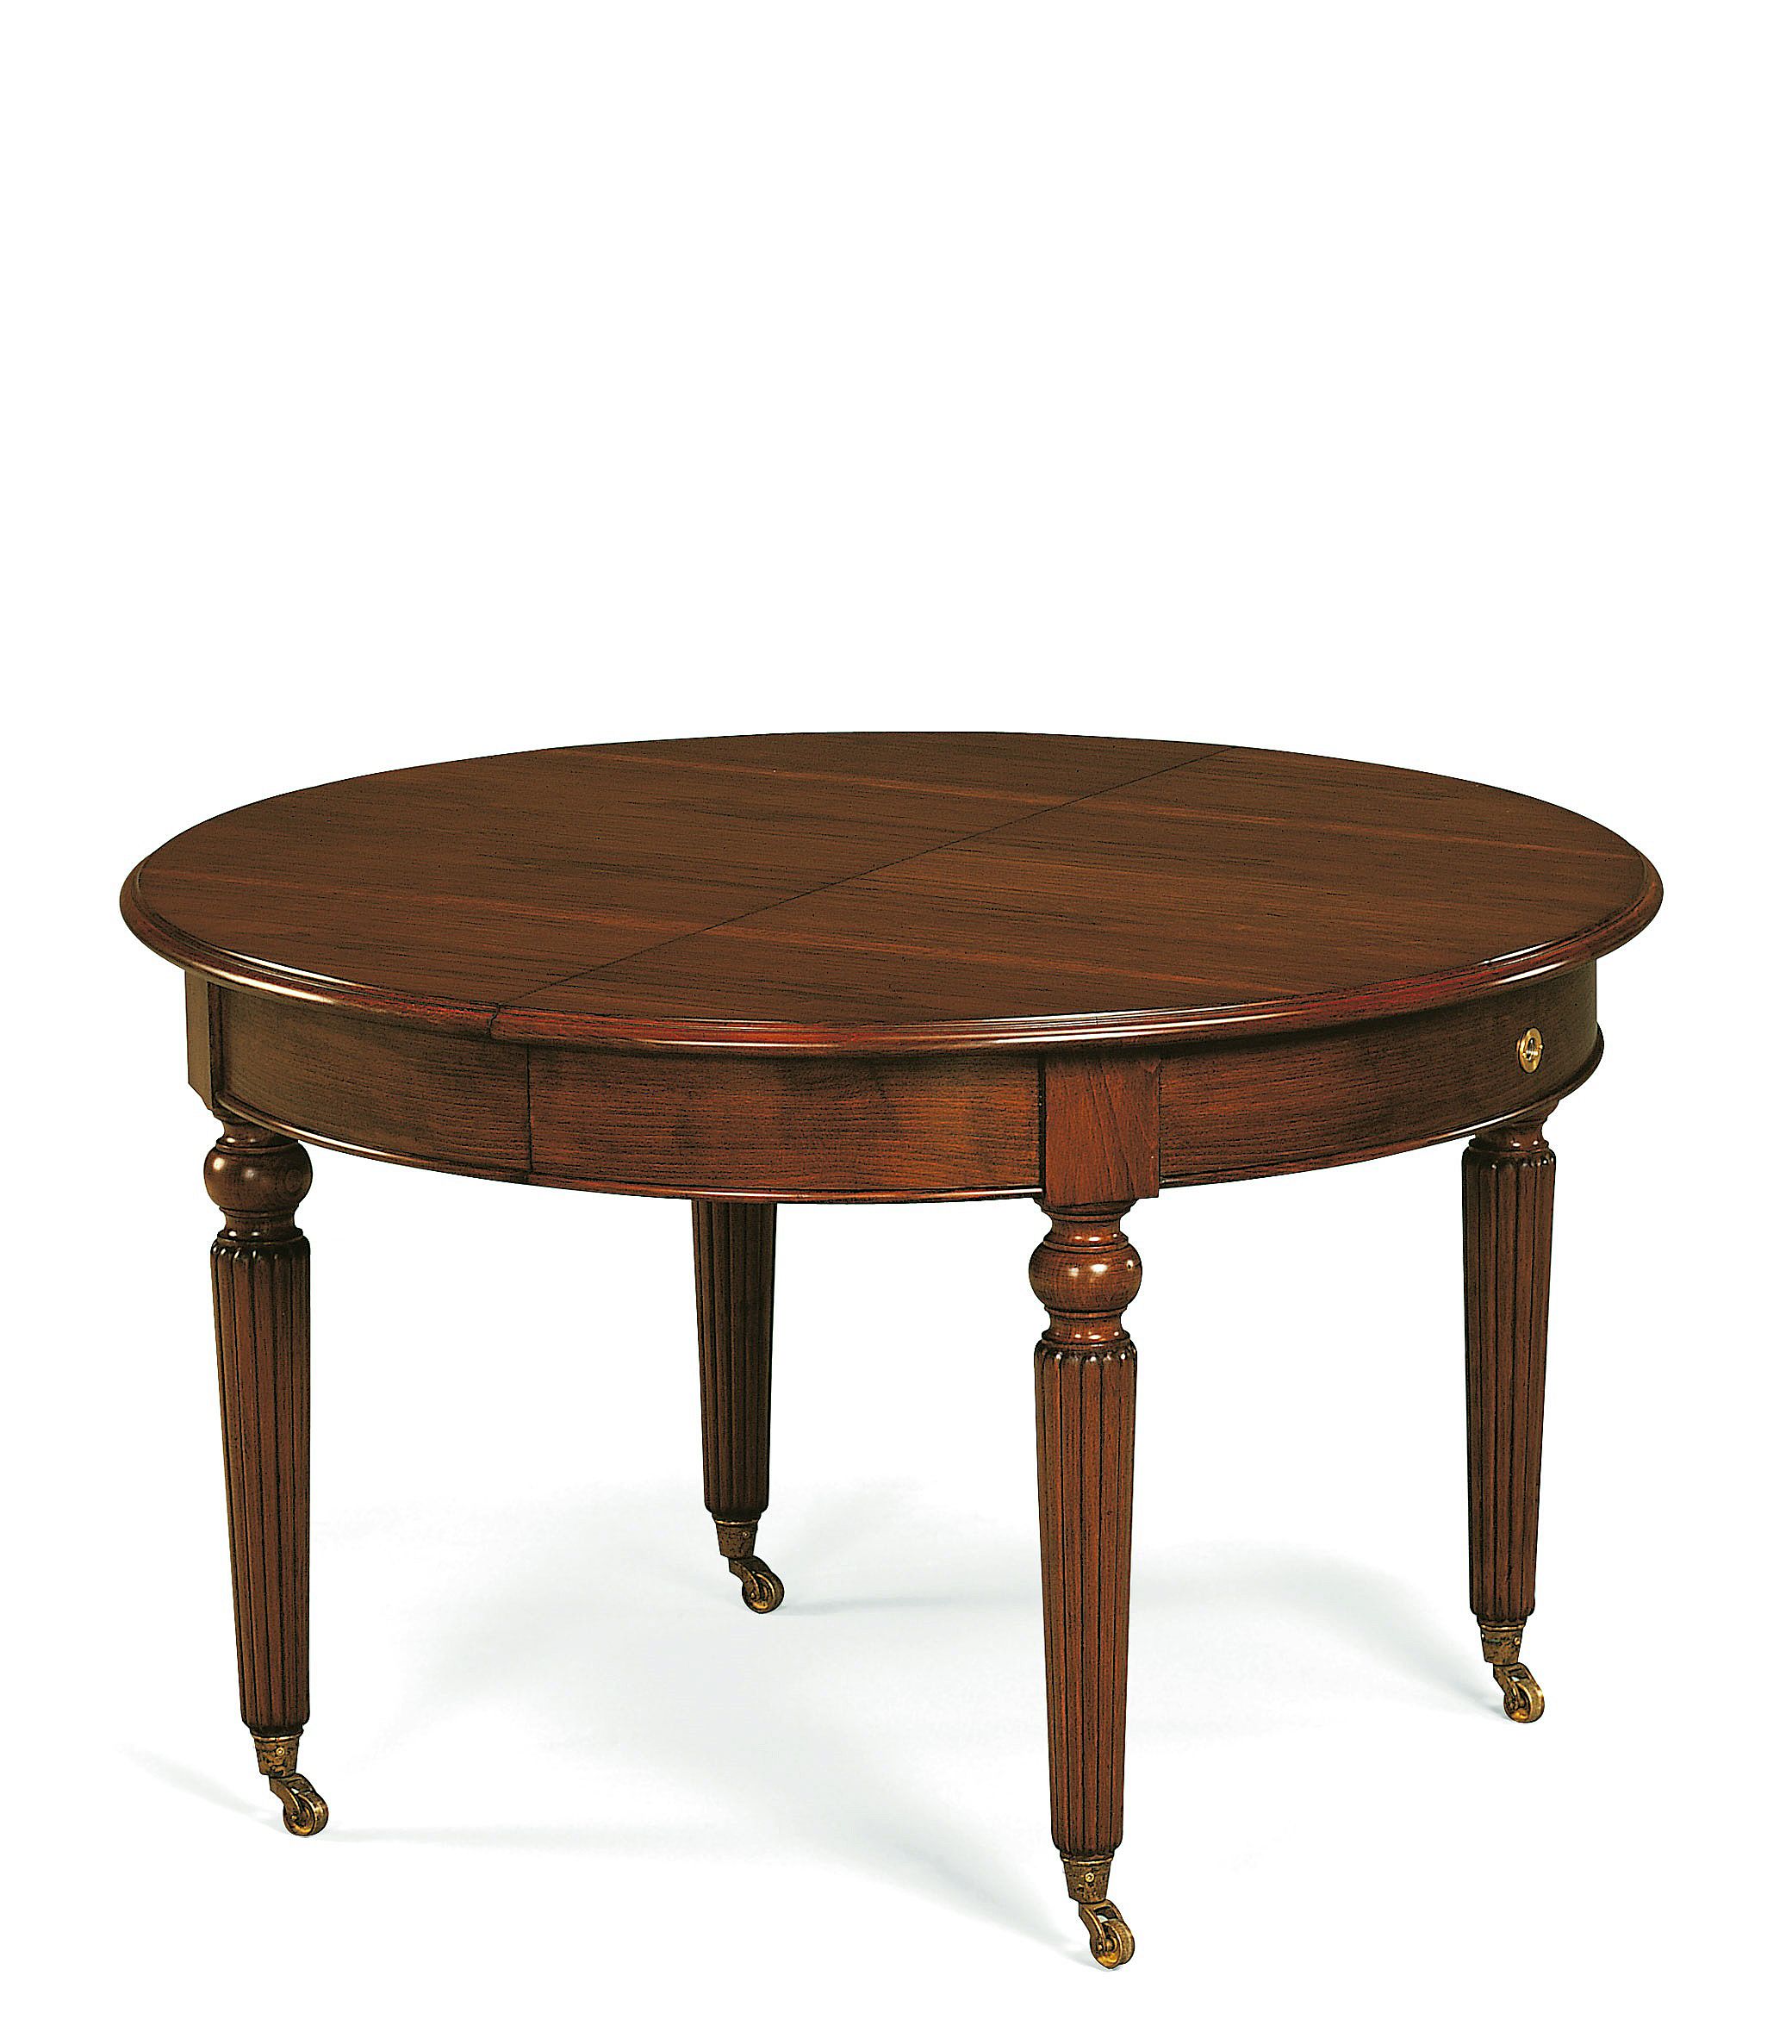 Round classic extendable dining table